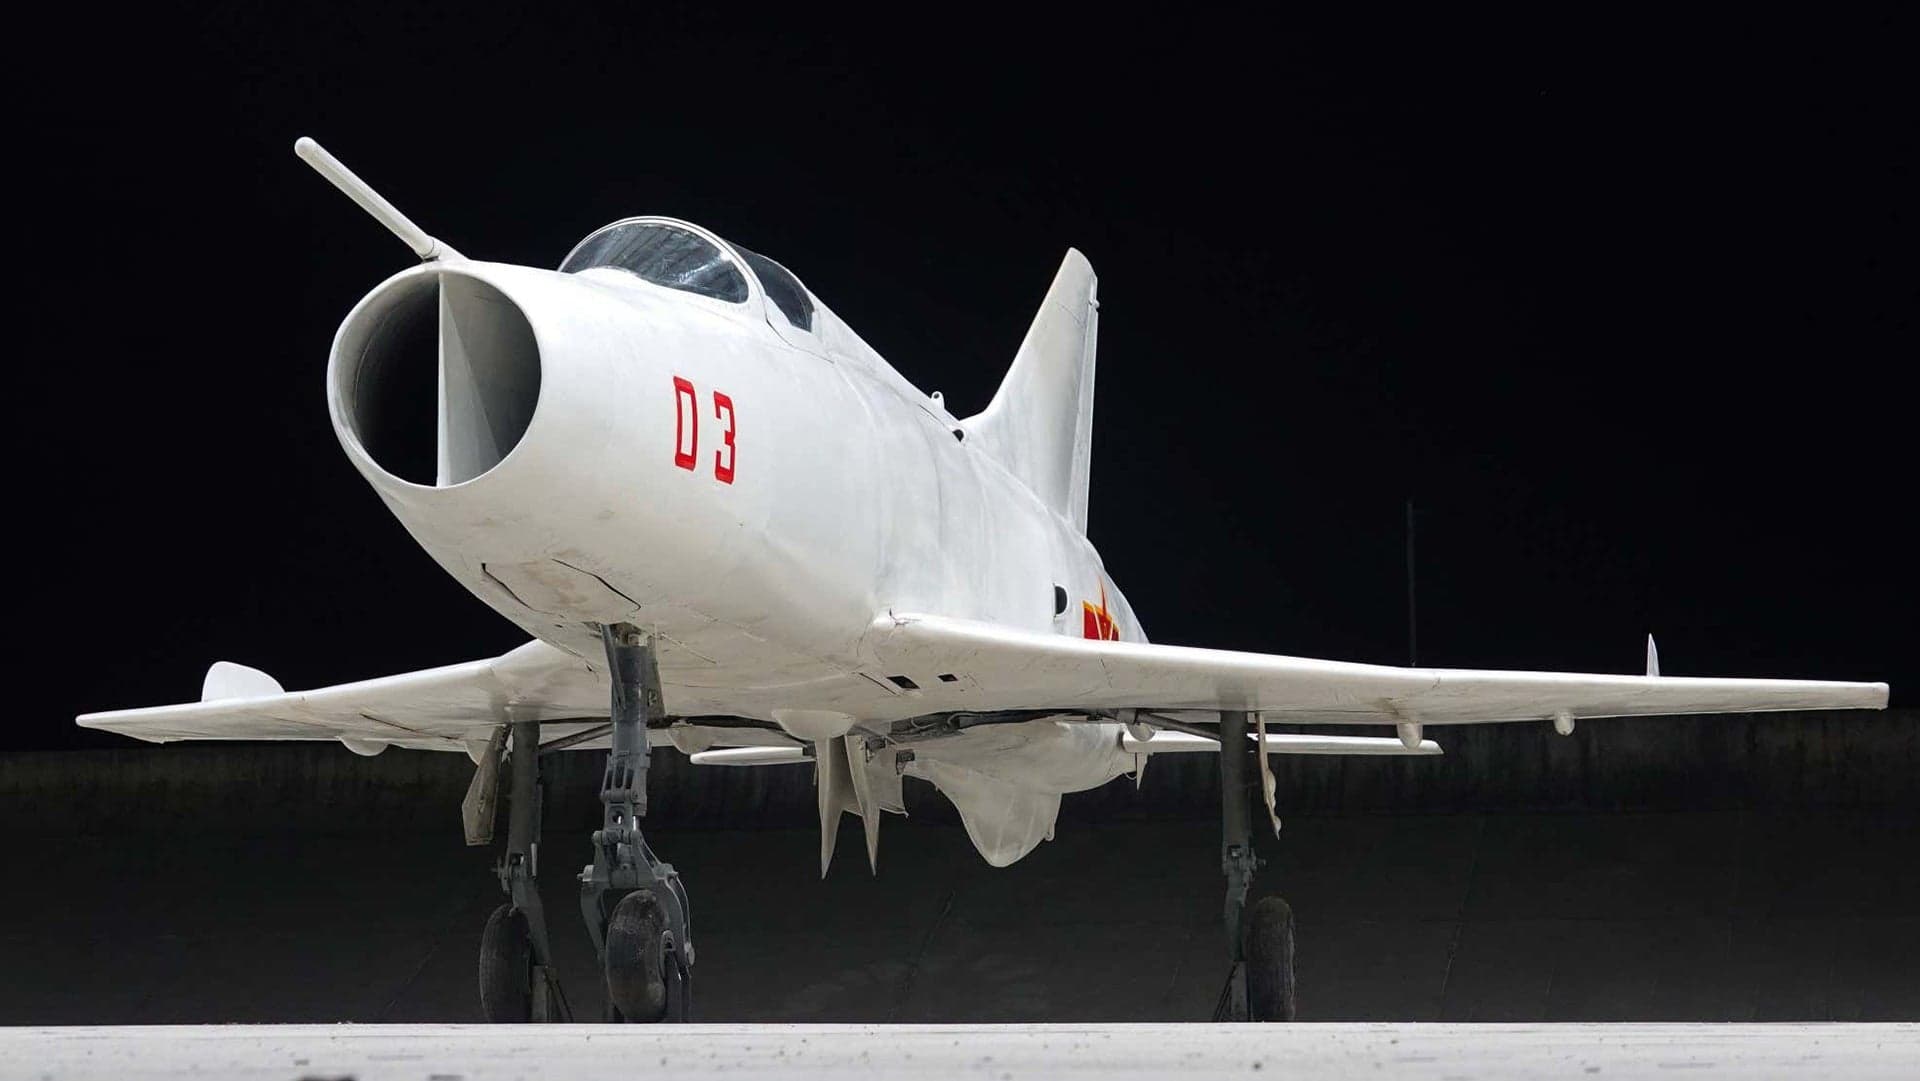 The Nanchang J-12 Is The Lightweight Chinese Fighter You’ve Probably Never Heard Of